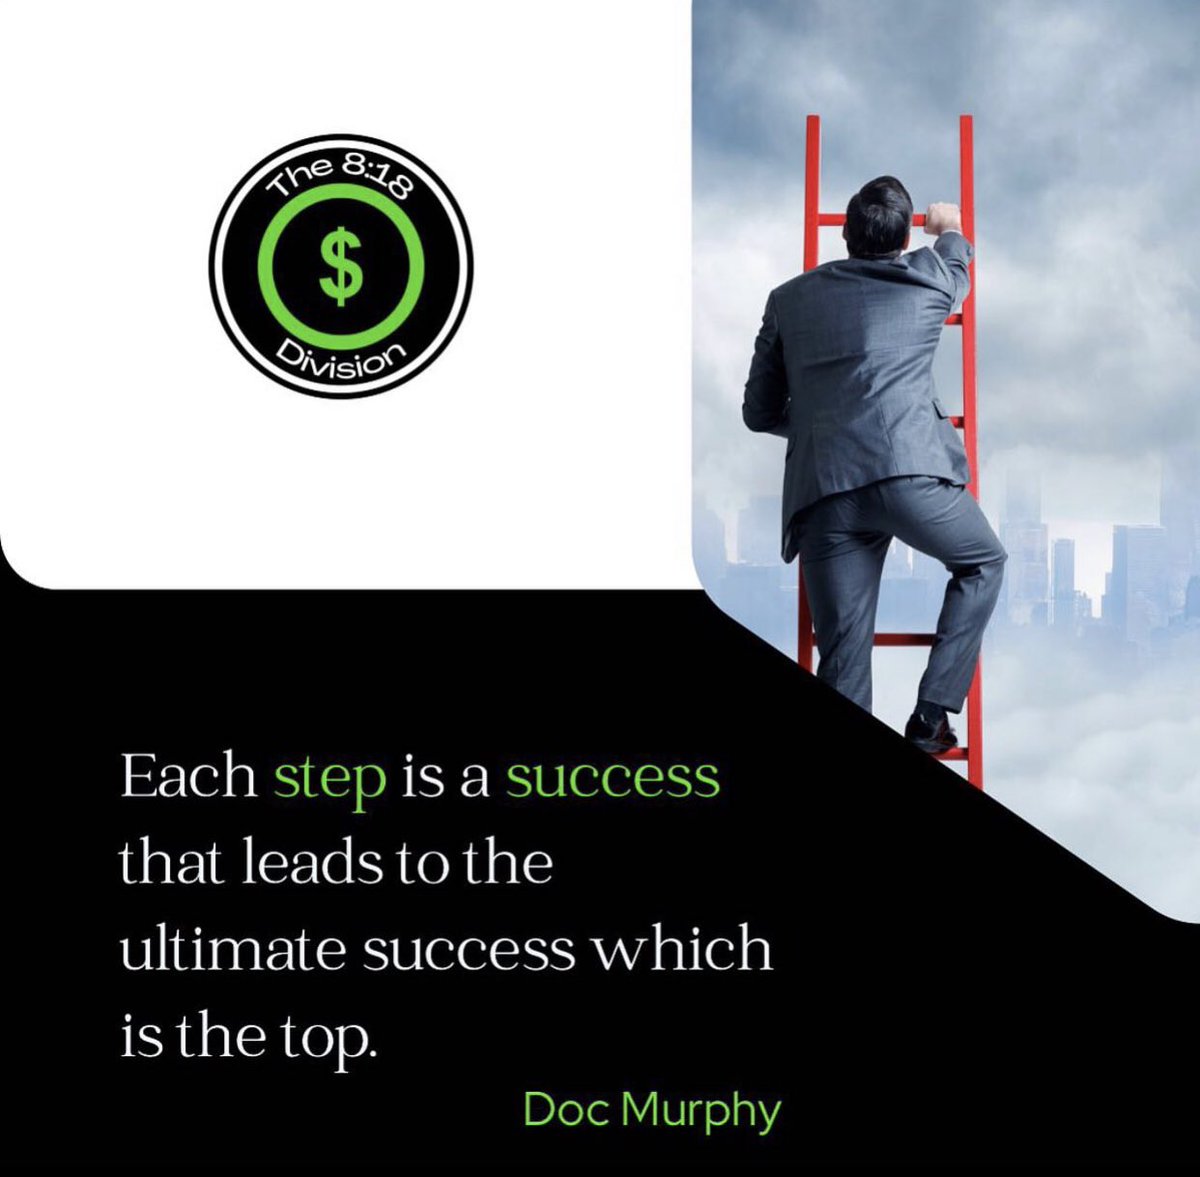 Each step is a success that leads to the ultimate success which is the top. #success #ladder #the818division #business #kingdompreneur